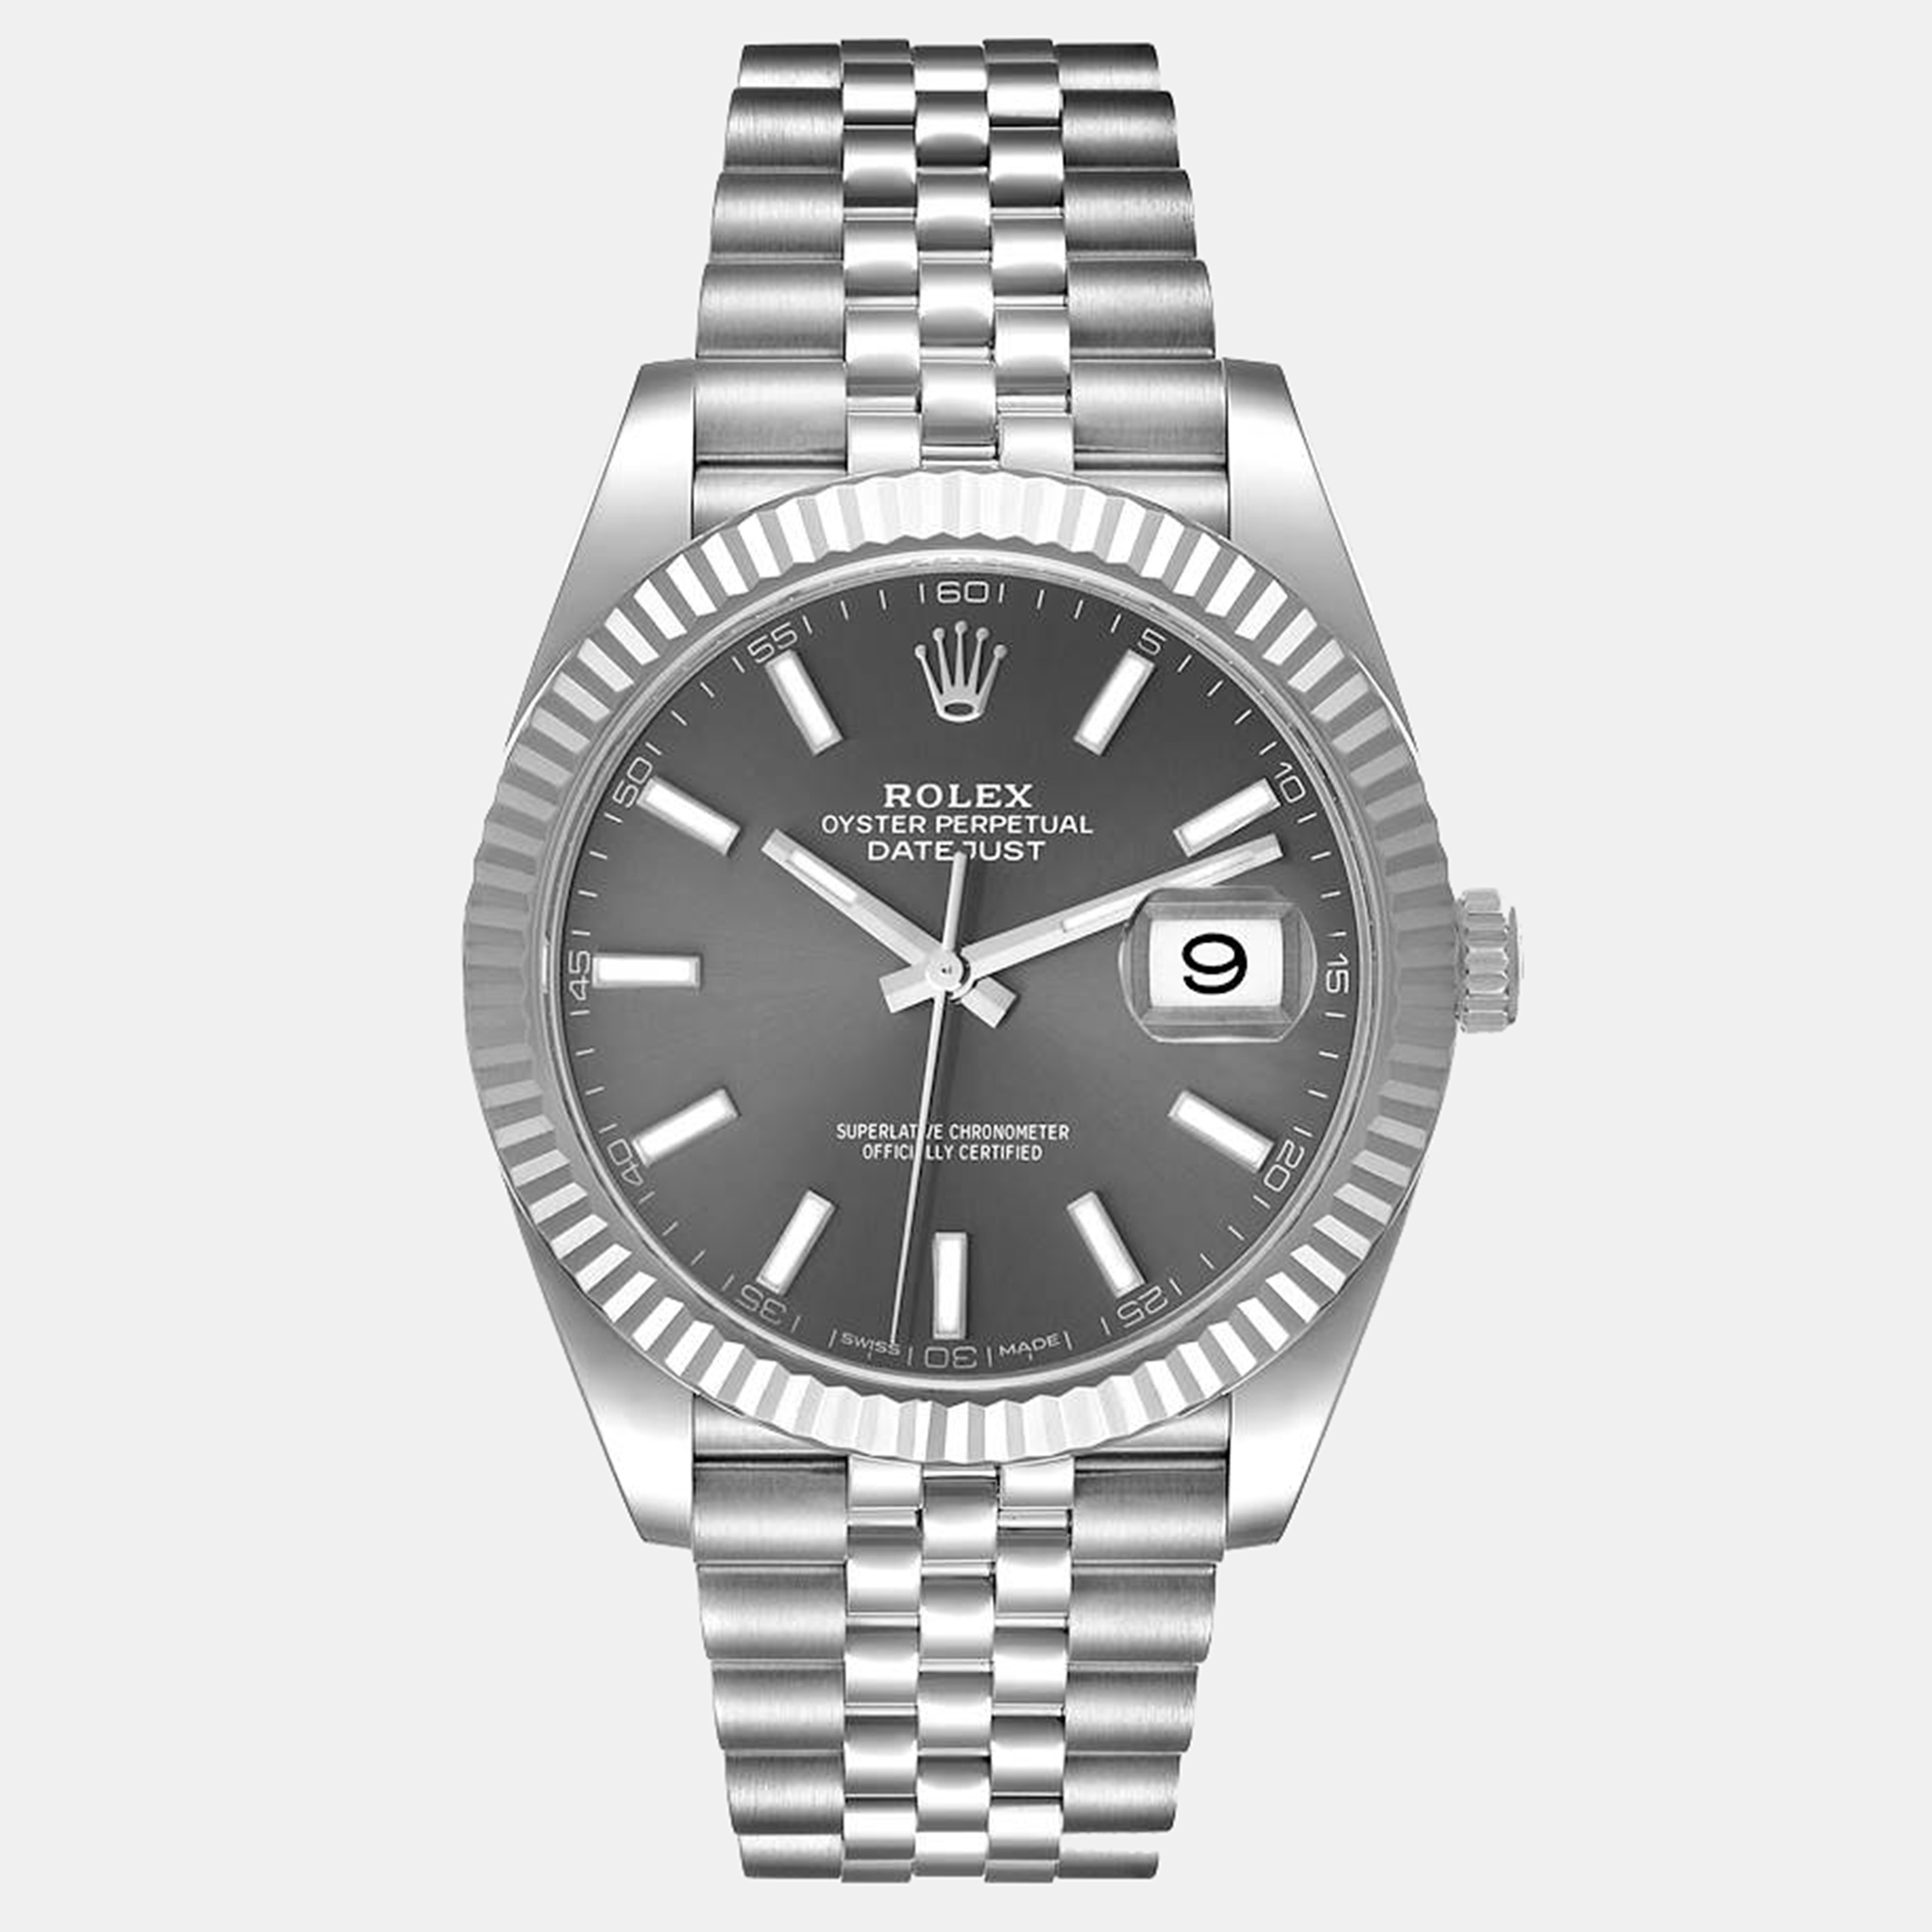 For classic elegance with a sophisticated flair go for this stylish Rolex Datejust wristwatch. The watch pairs a rhodium dial featuring luminescent hands and indexes and a date window with a stainless steel case and an 18K white gold fluted bezel. It is secured by a stainless steel bracelet.